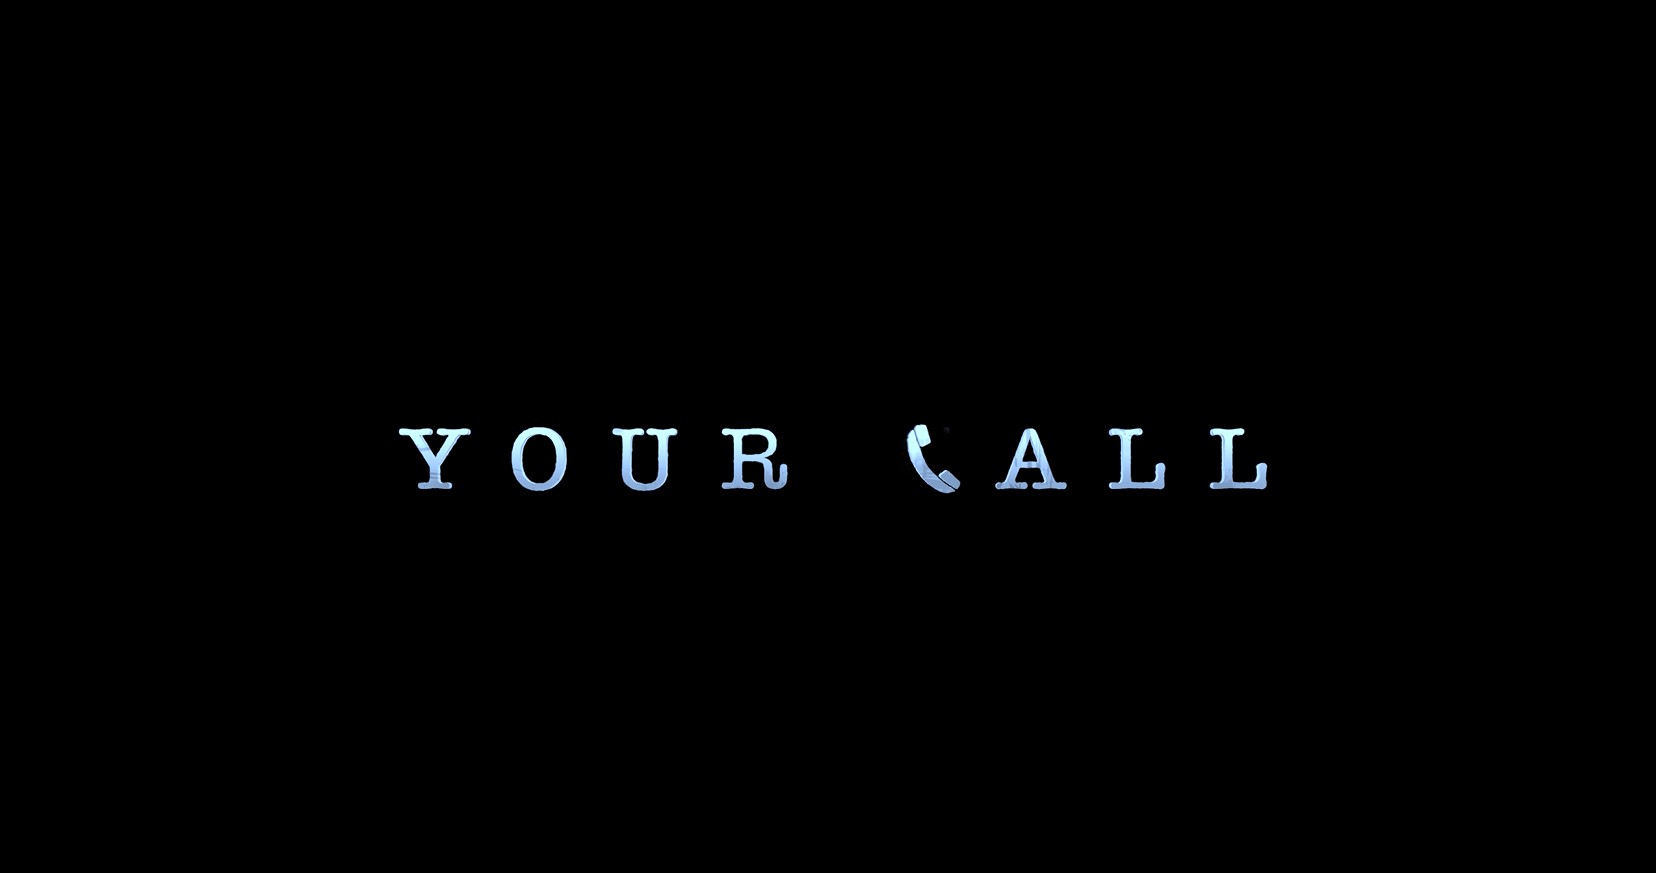 Still of title screen from student film featuring telephone symbol an text "Your Call"